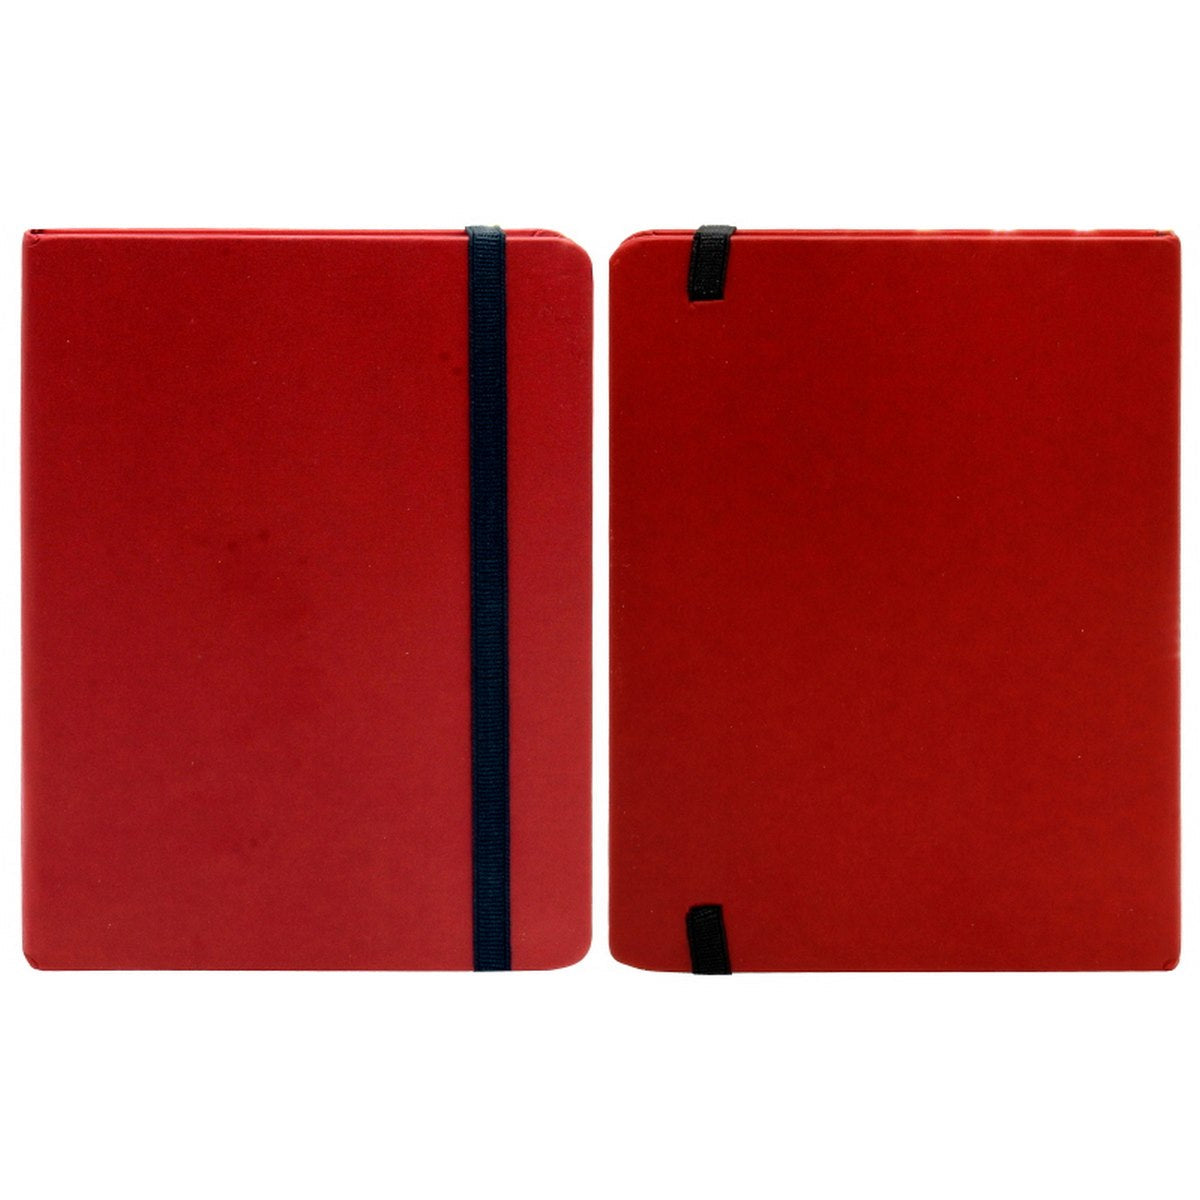 jags-mumbai Formal Diary product product product product Note Book Journal With Elastic Small 160Peg A6NBBP